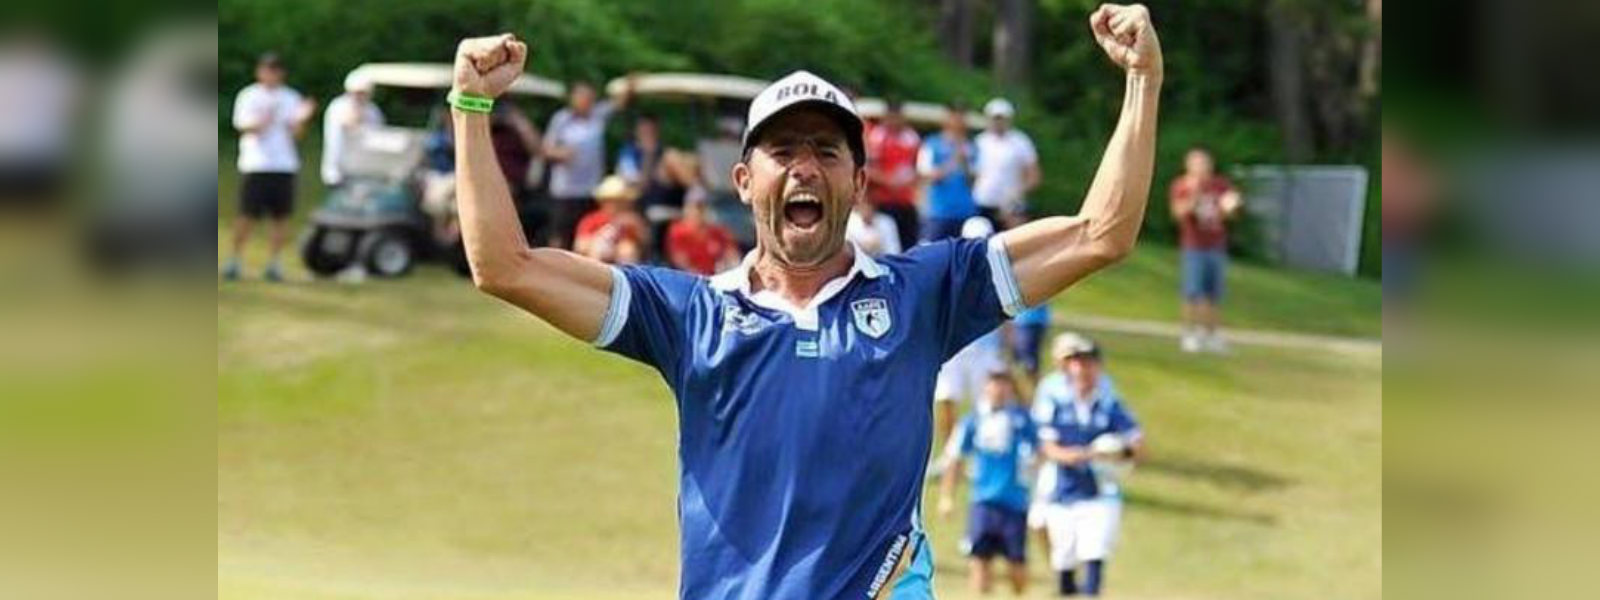 Argentina's Perrone crowned footgolf world champ 